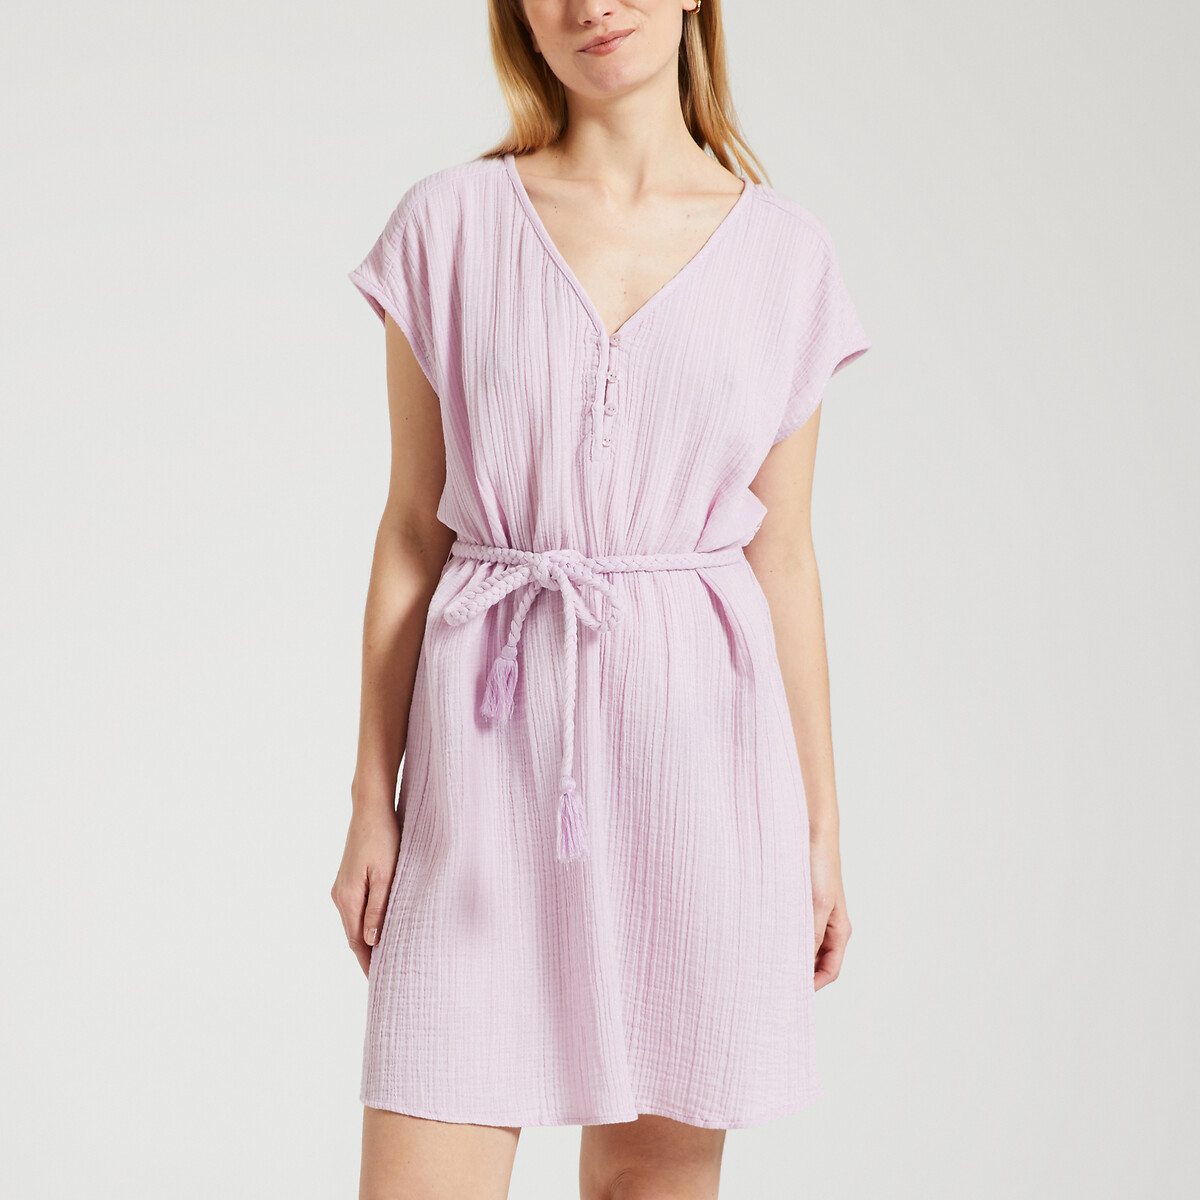 Image of Rosaly Mini Dress in Cotton Muslin with Tie-Waist